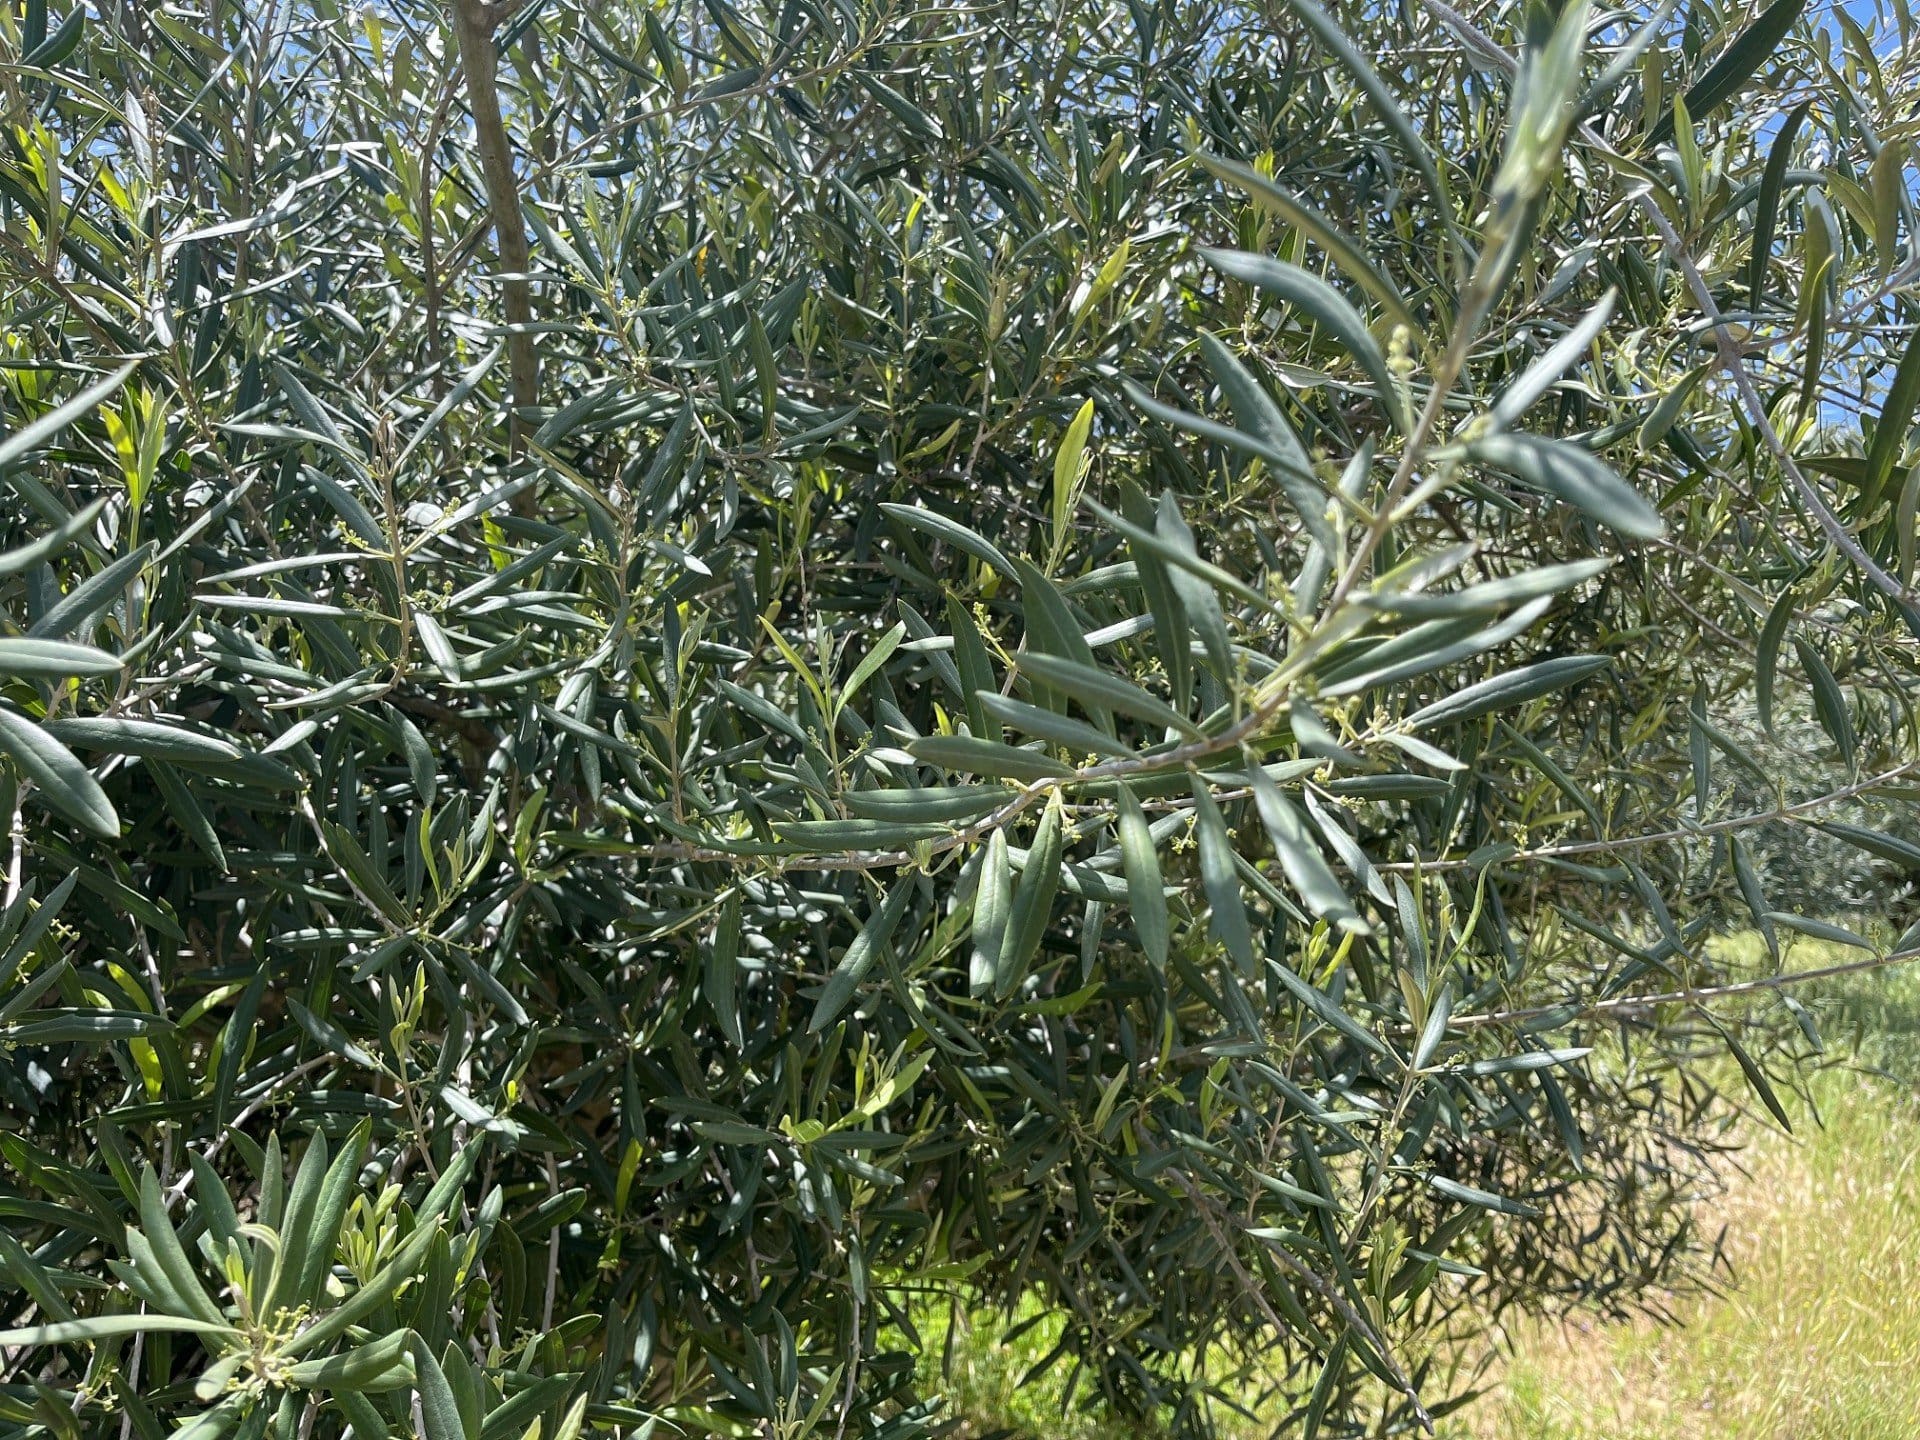 north-america-profiles-the-best-olive-oils-production-the-challenges-and-triumphs-of-taking-over-an-olive-farm-in-california-olive-oil-times